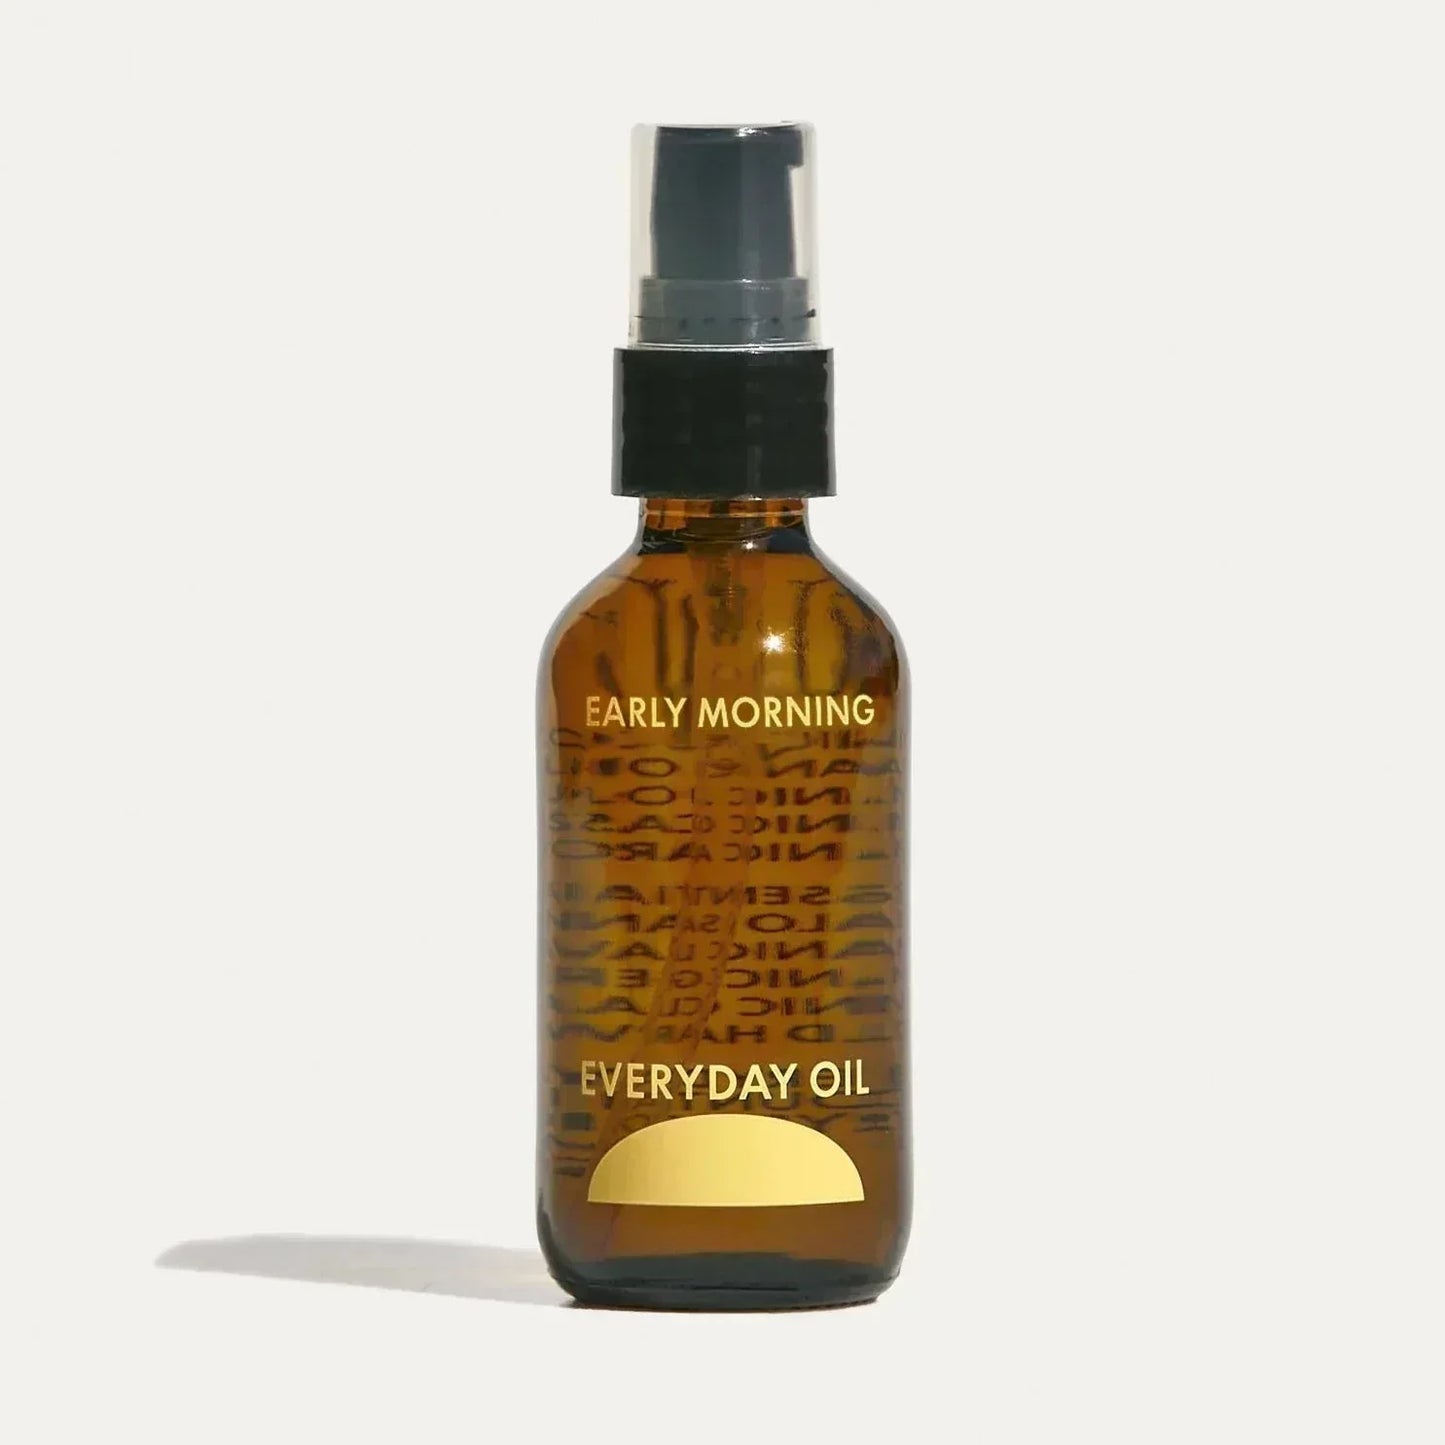 Everyday oil Early Morning available at Easy Tiger Toronto